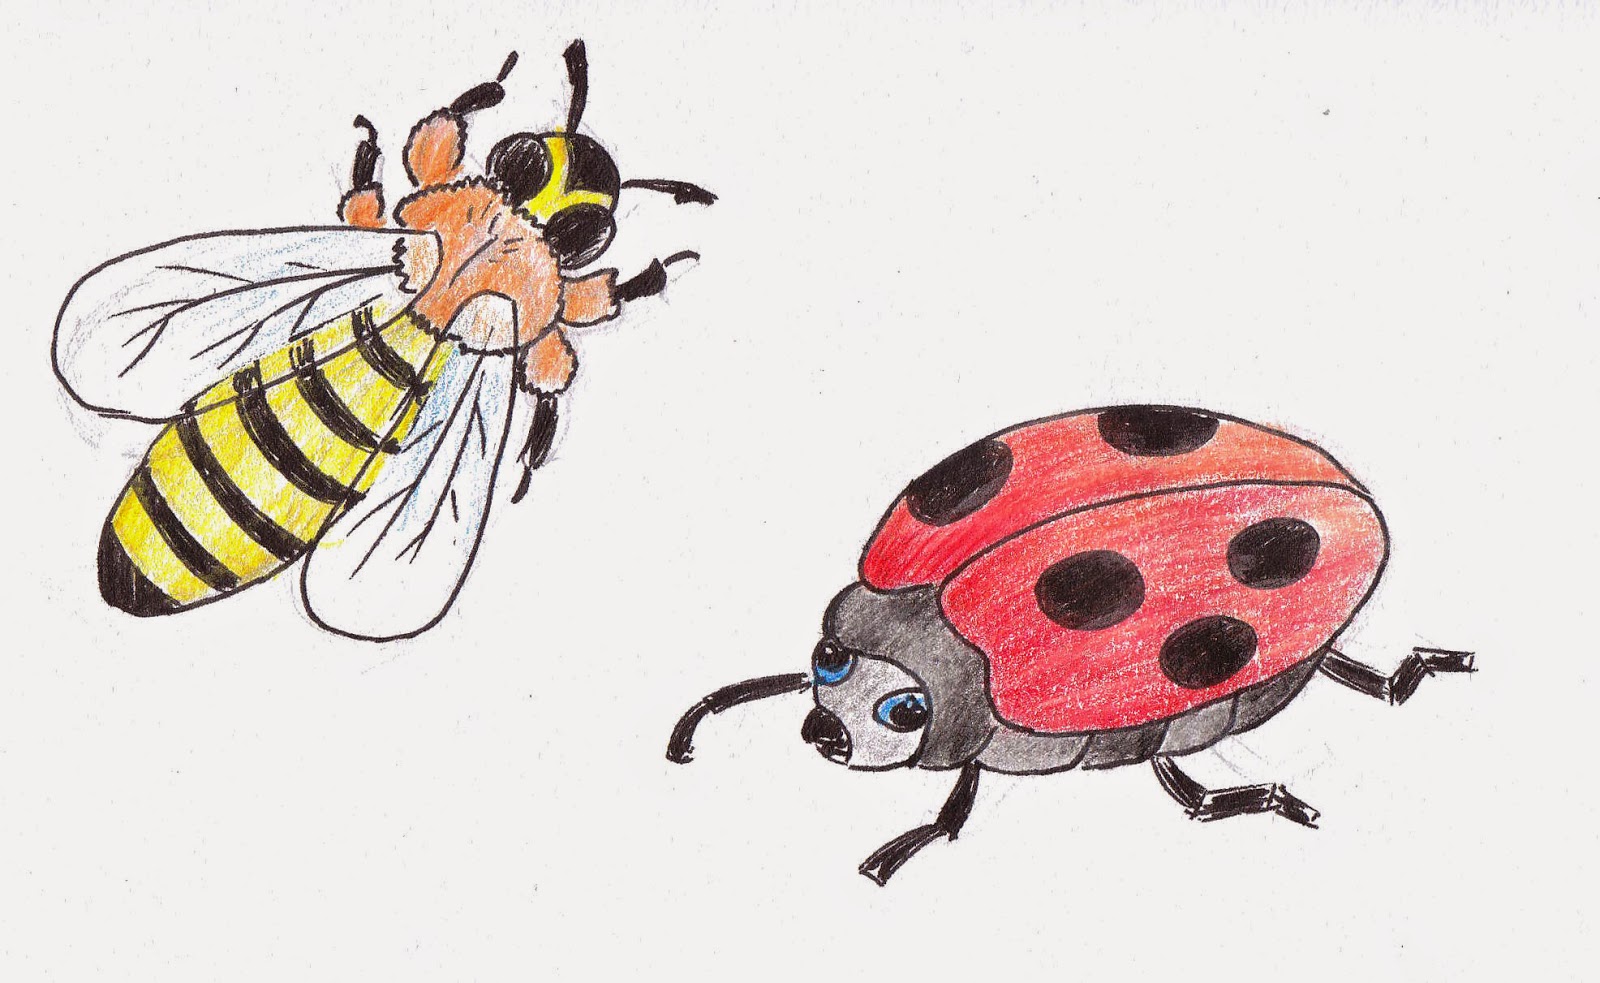 Best How To Draw Insects And Bugs of all time Learn more here 